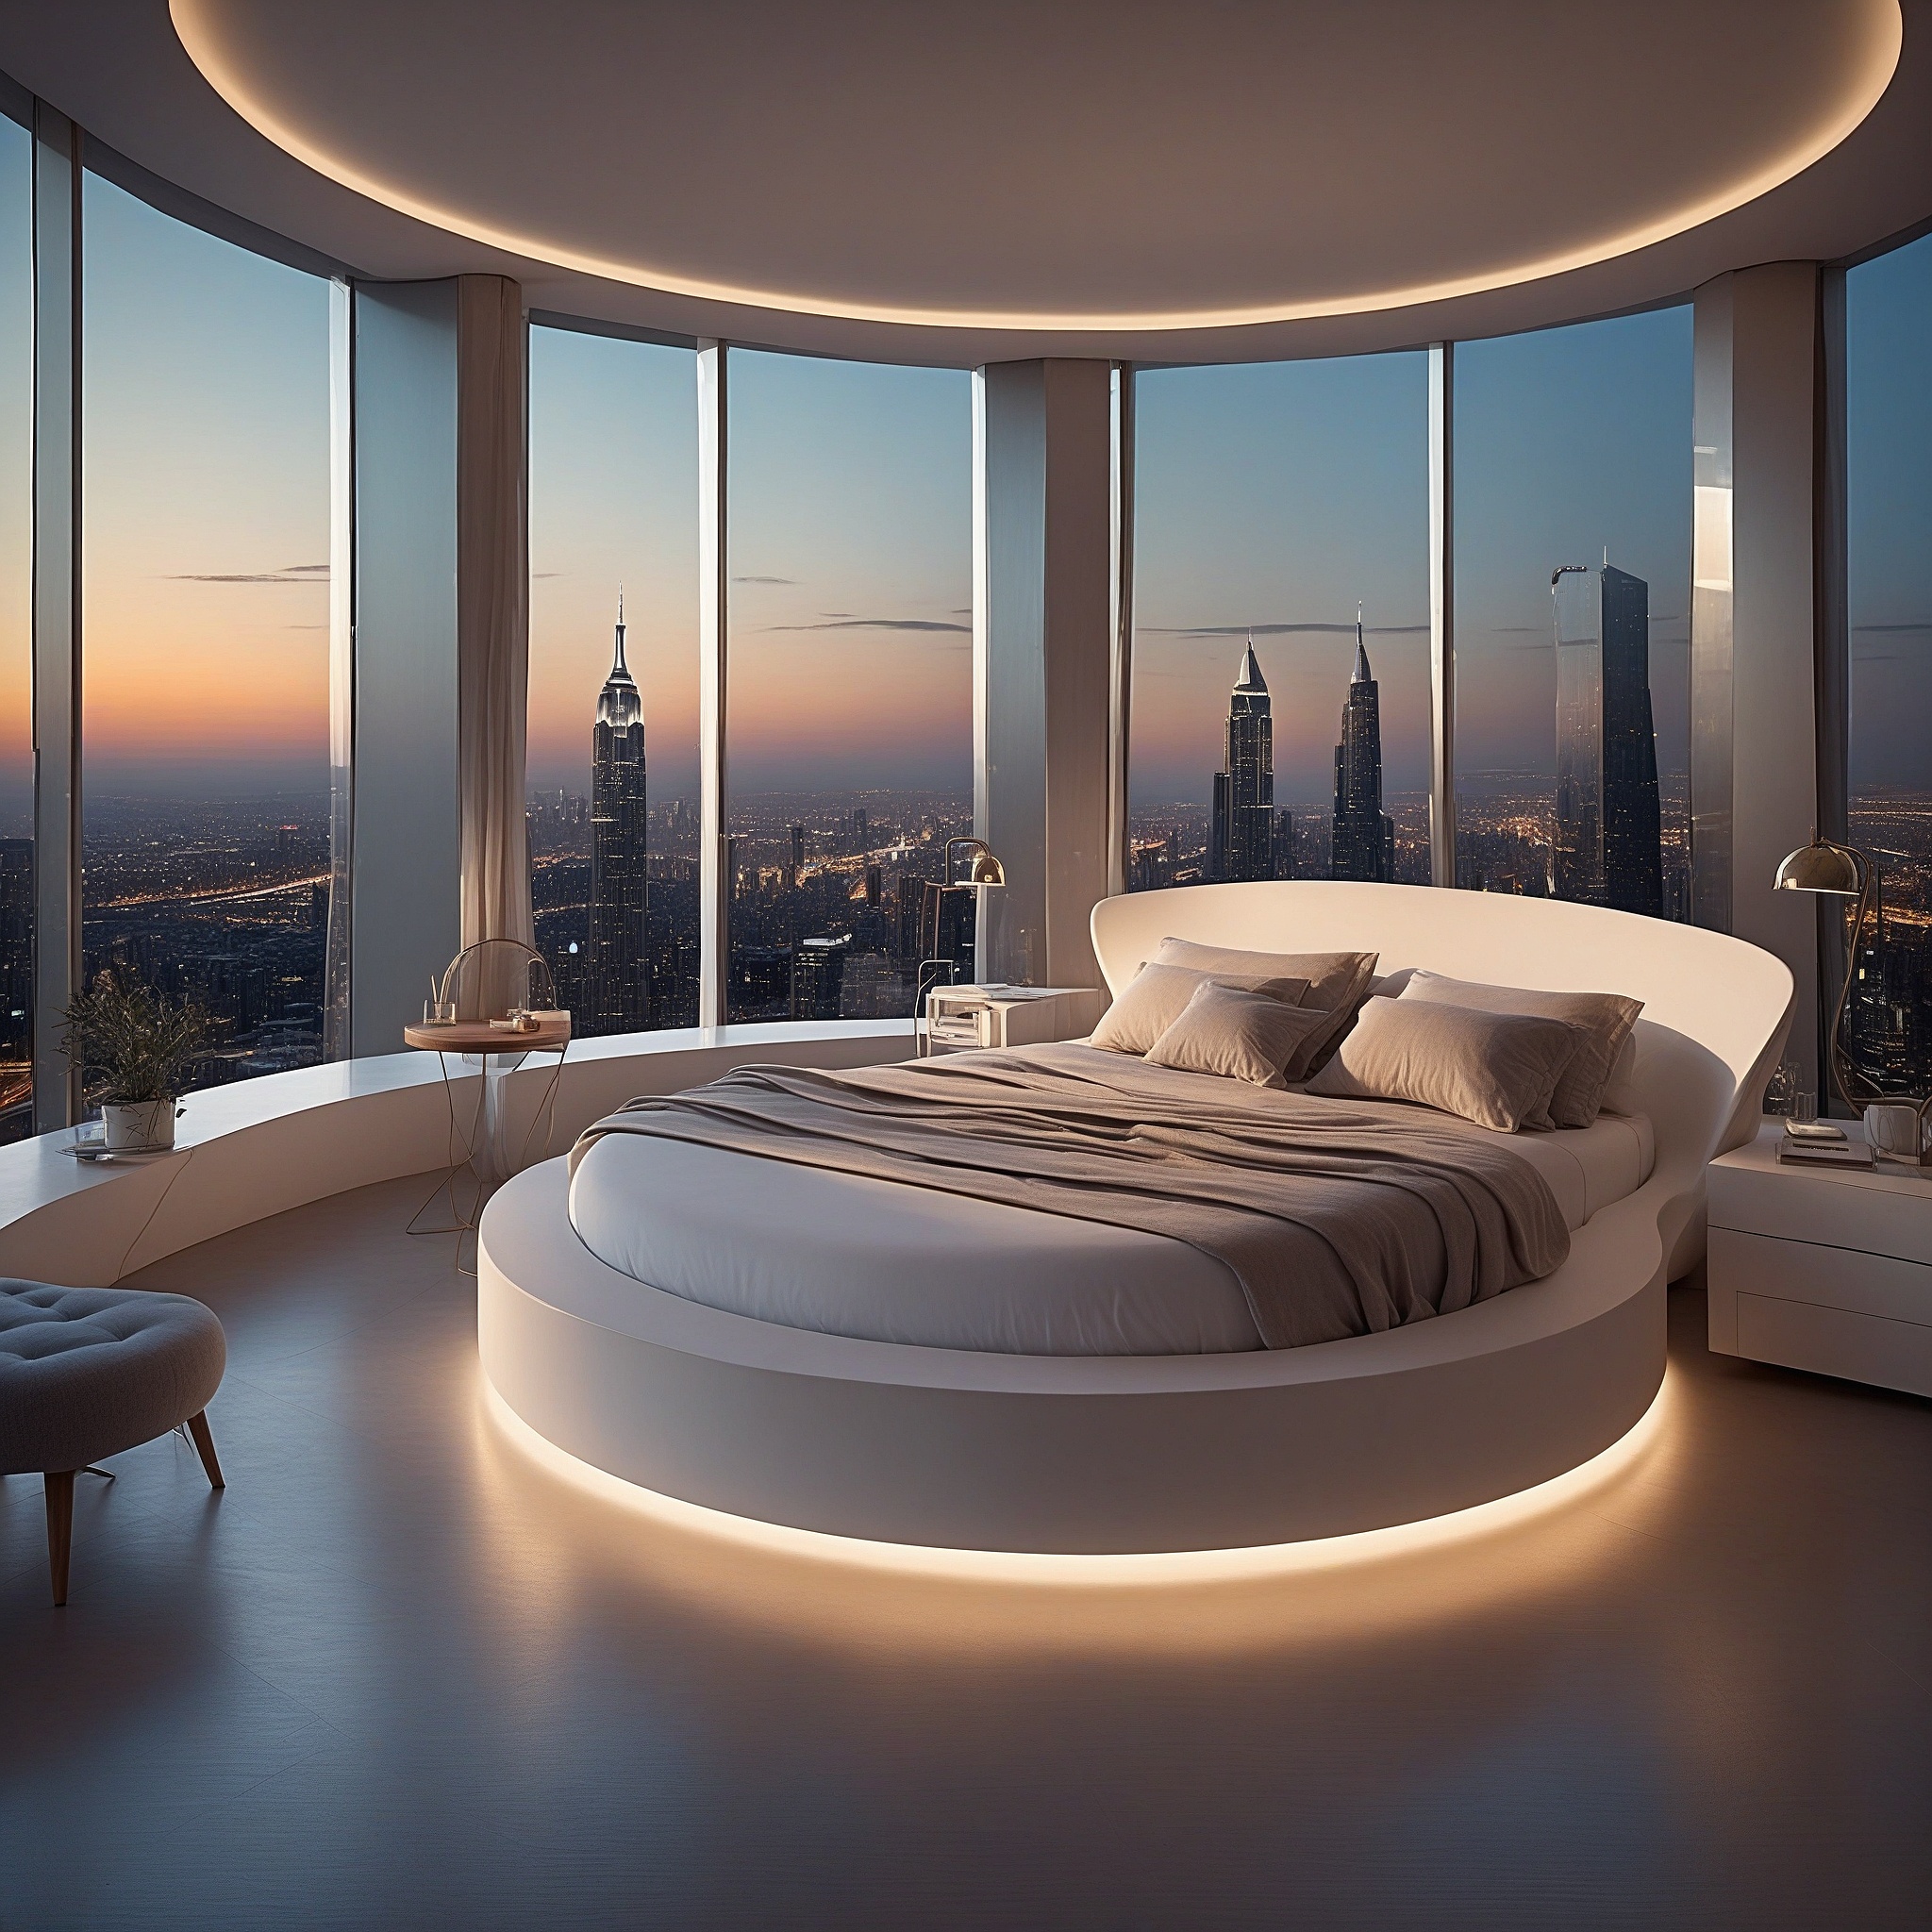 Modern Futuristic Bedroom, Circular Bed With a Glowing Base, Touch-sensitive Smart Surfaces